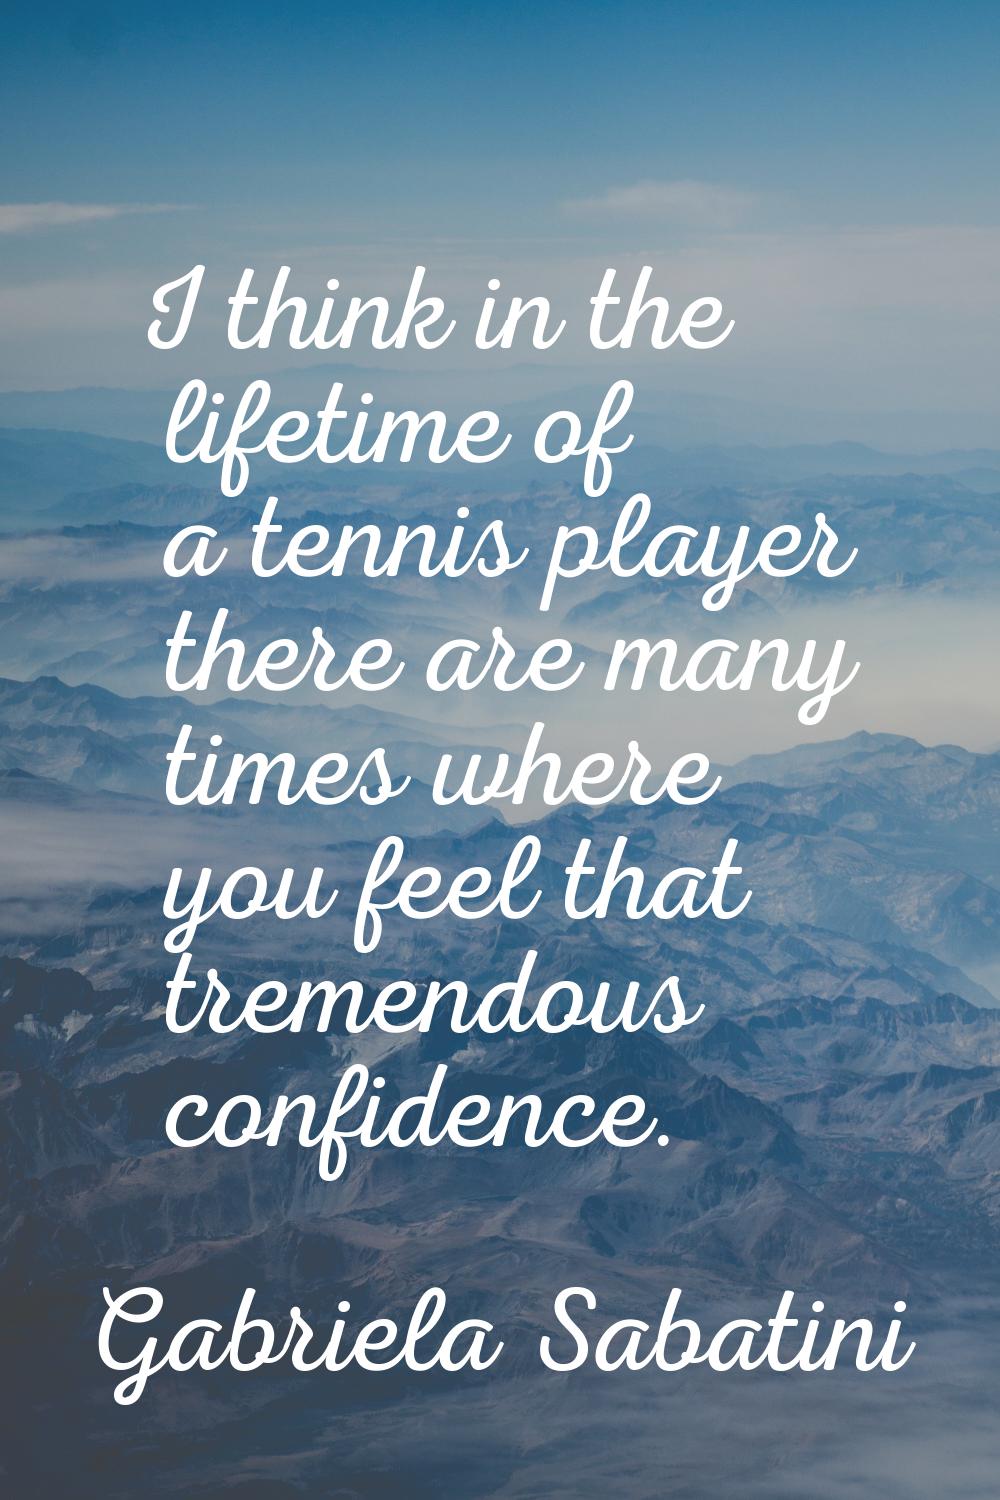 I think in the lifetime of a tennis player there are many times where you feel that tremendous conf